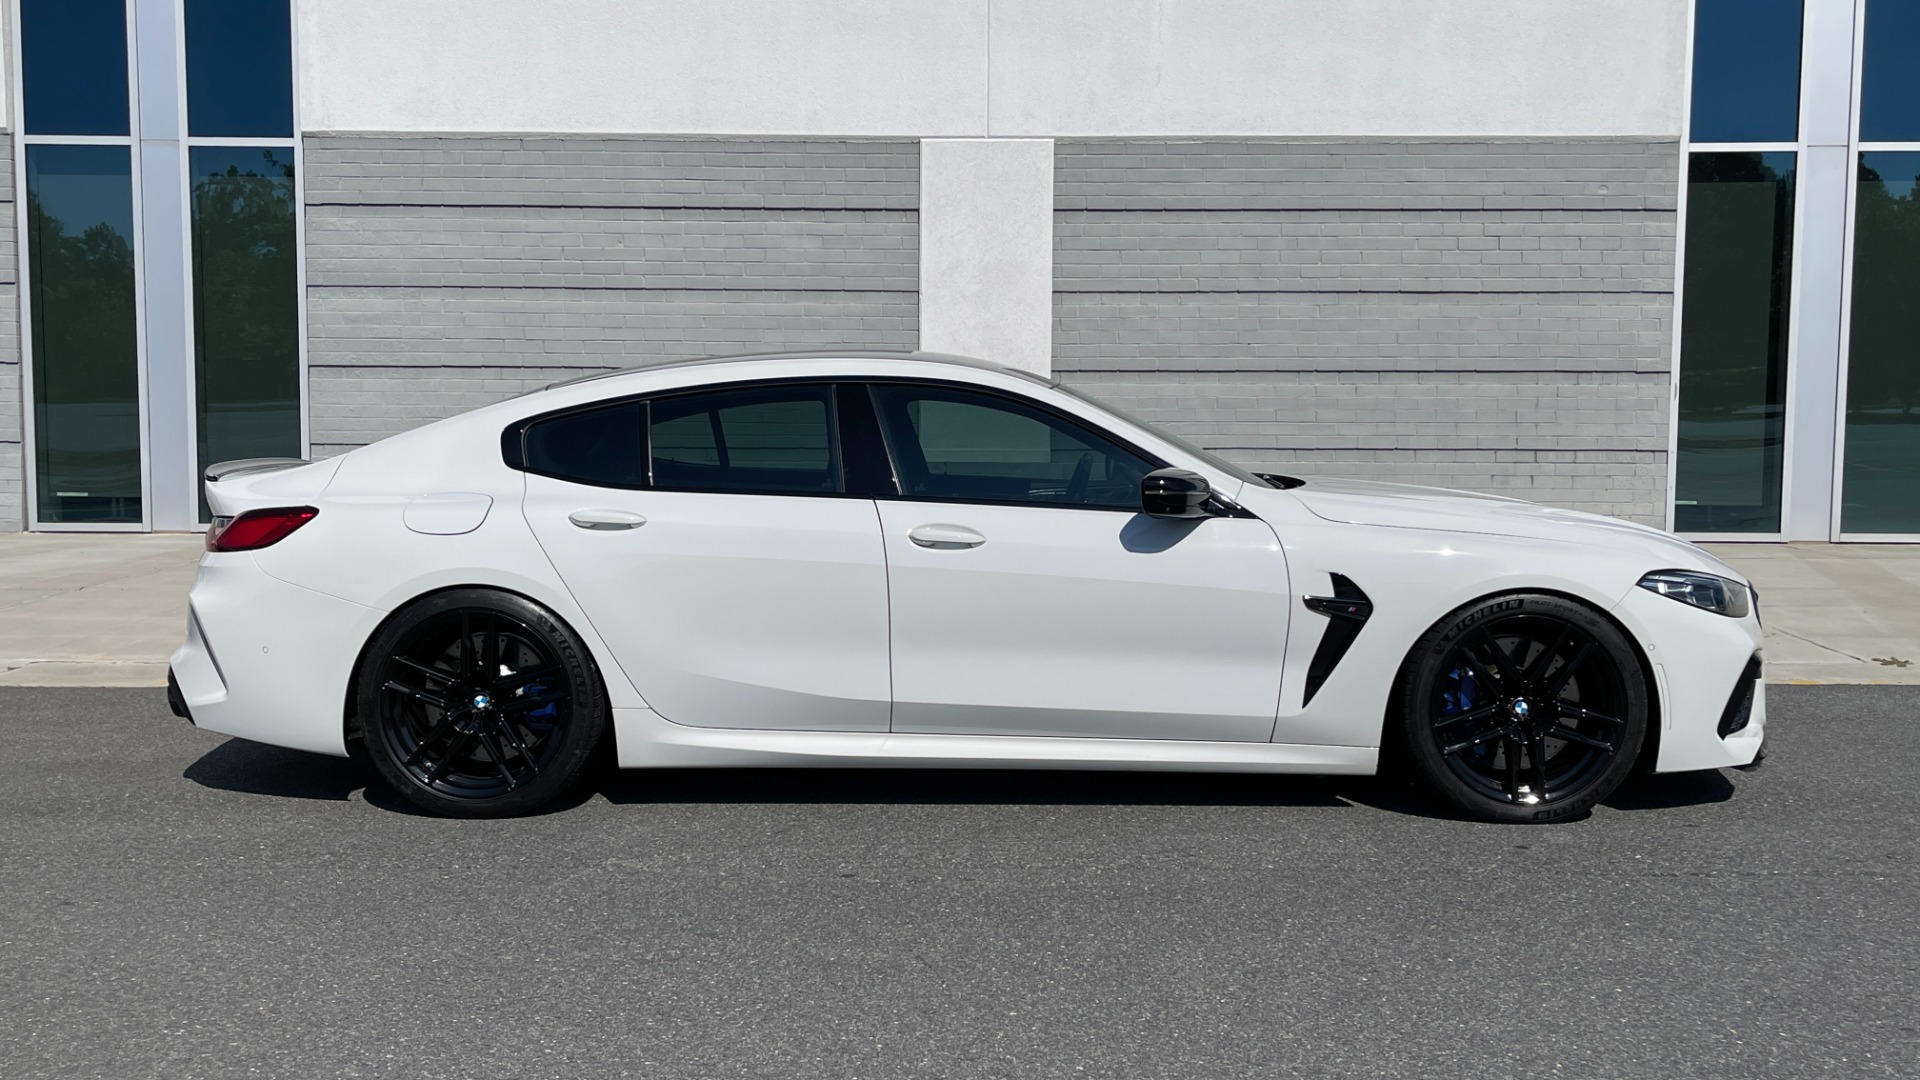 Used 2020 BMW M8 COMPETITON / TWIN TURBO / KW V3 SUSPENSION / FRONT LIFT / PPF / CERAMIC COA for sale $114,999 at Formula Imports in Charlotte NC 28227 5